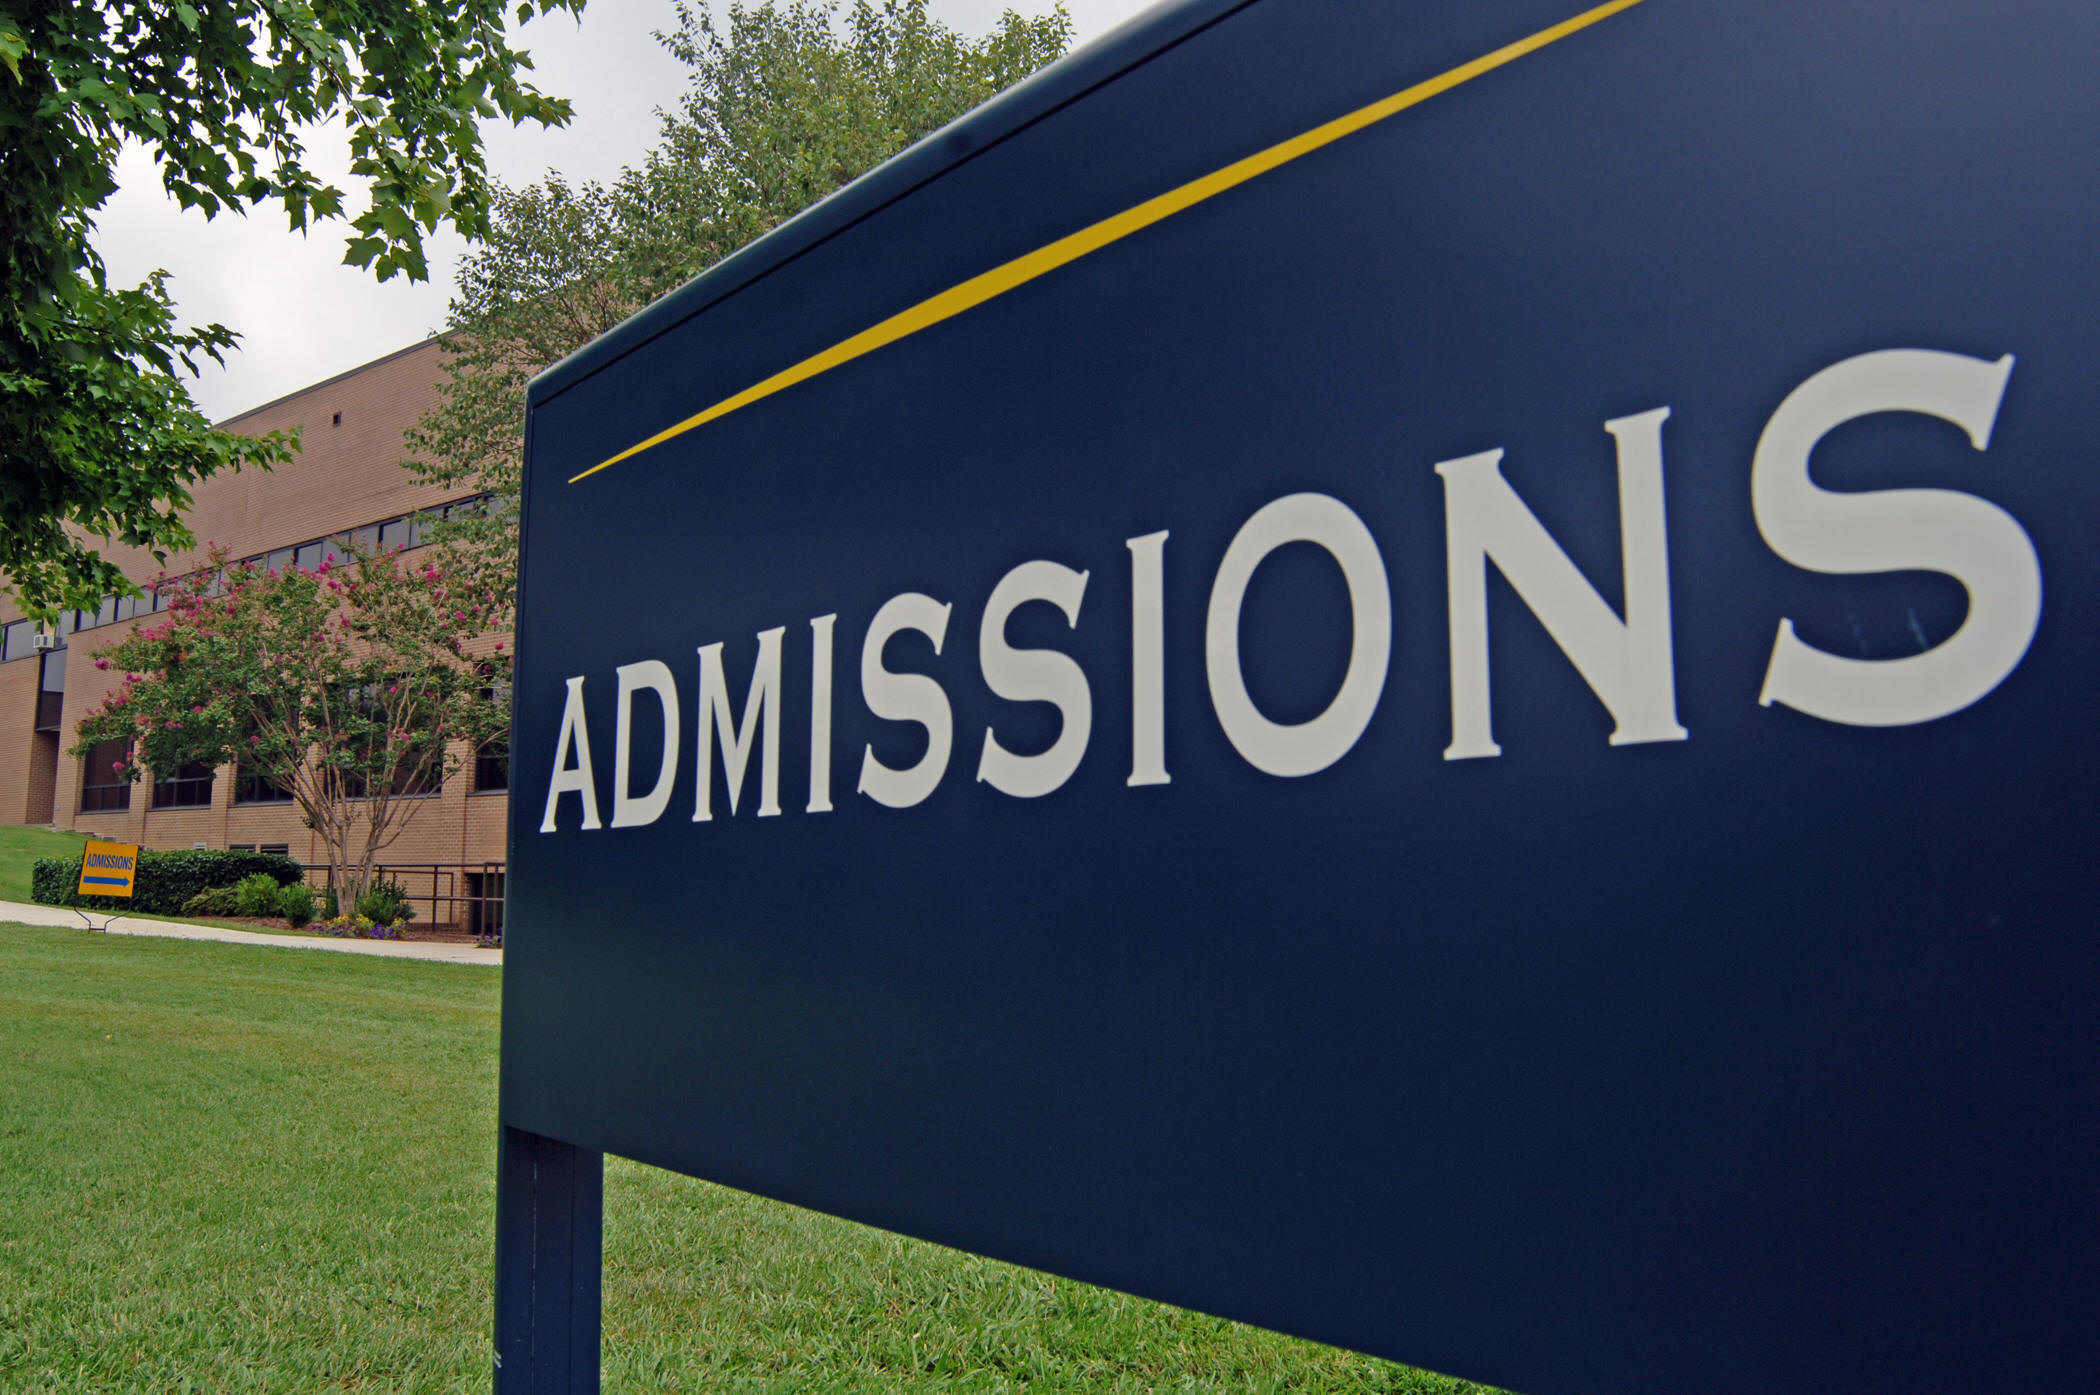 A big blue sign with white letters saying "admissions" in the foreground with grass and college like building in the background.